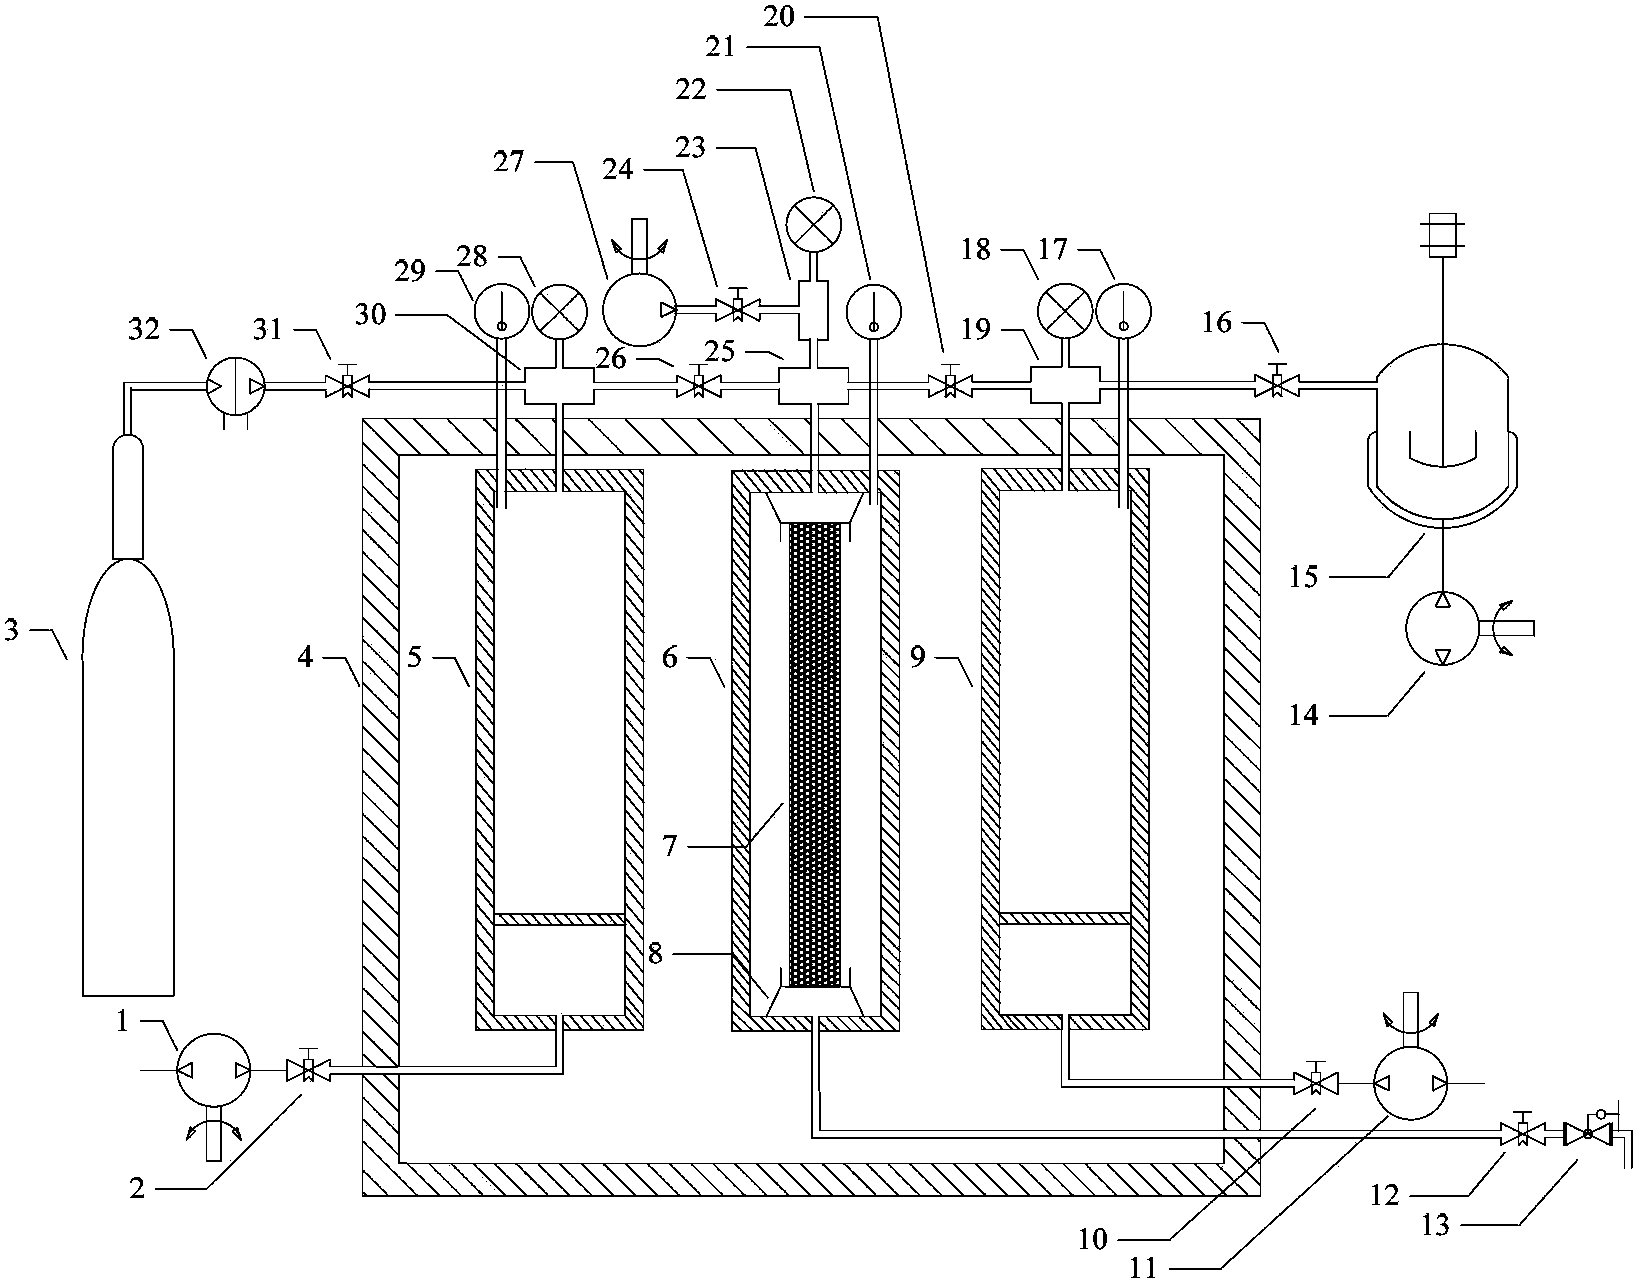 Apparatus for measuring diffusion coefficient of carbon dioxide in rock